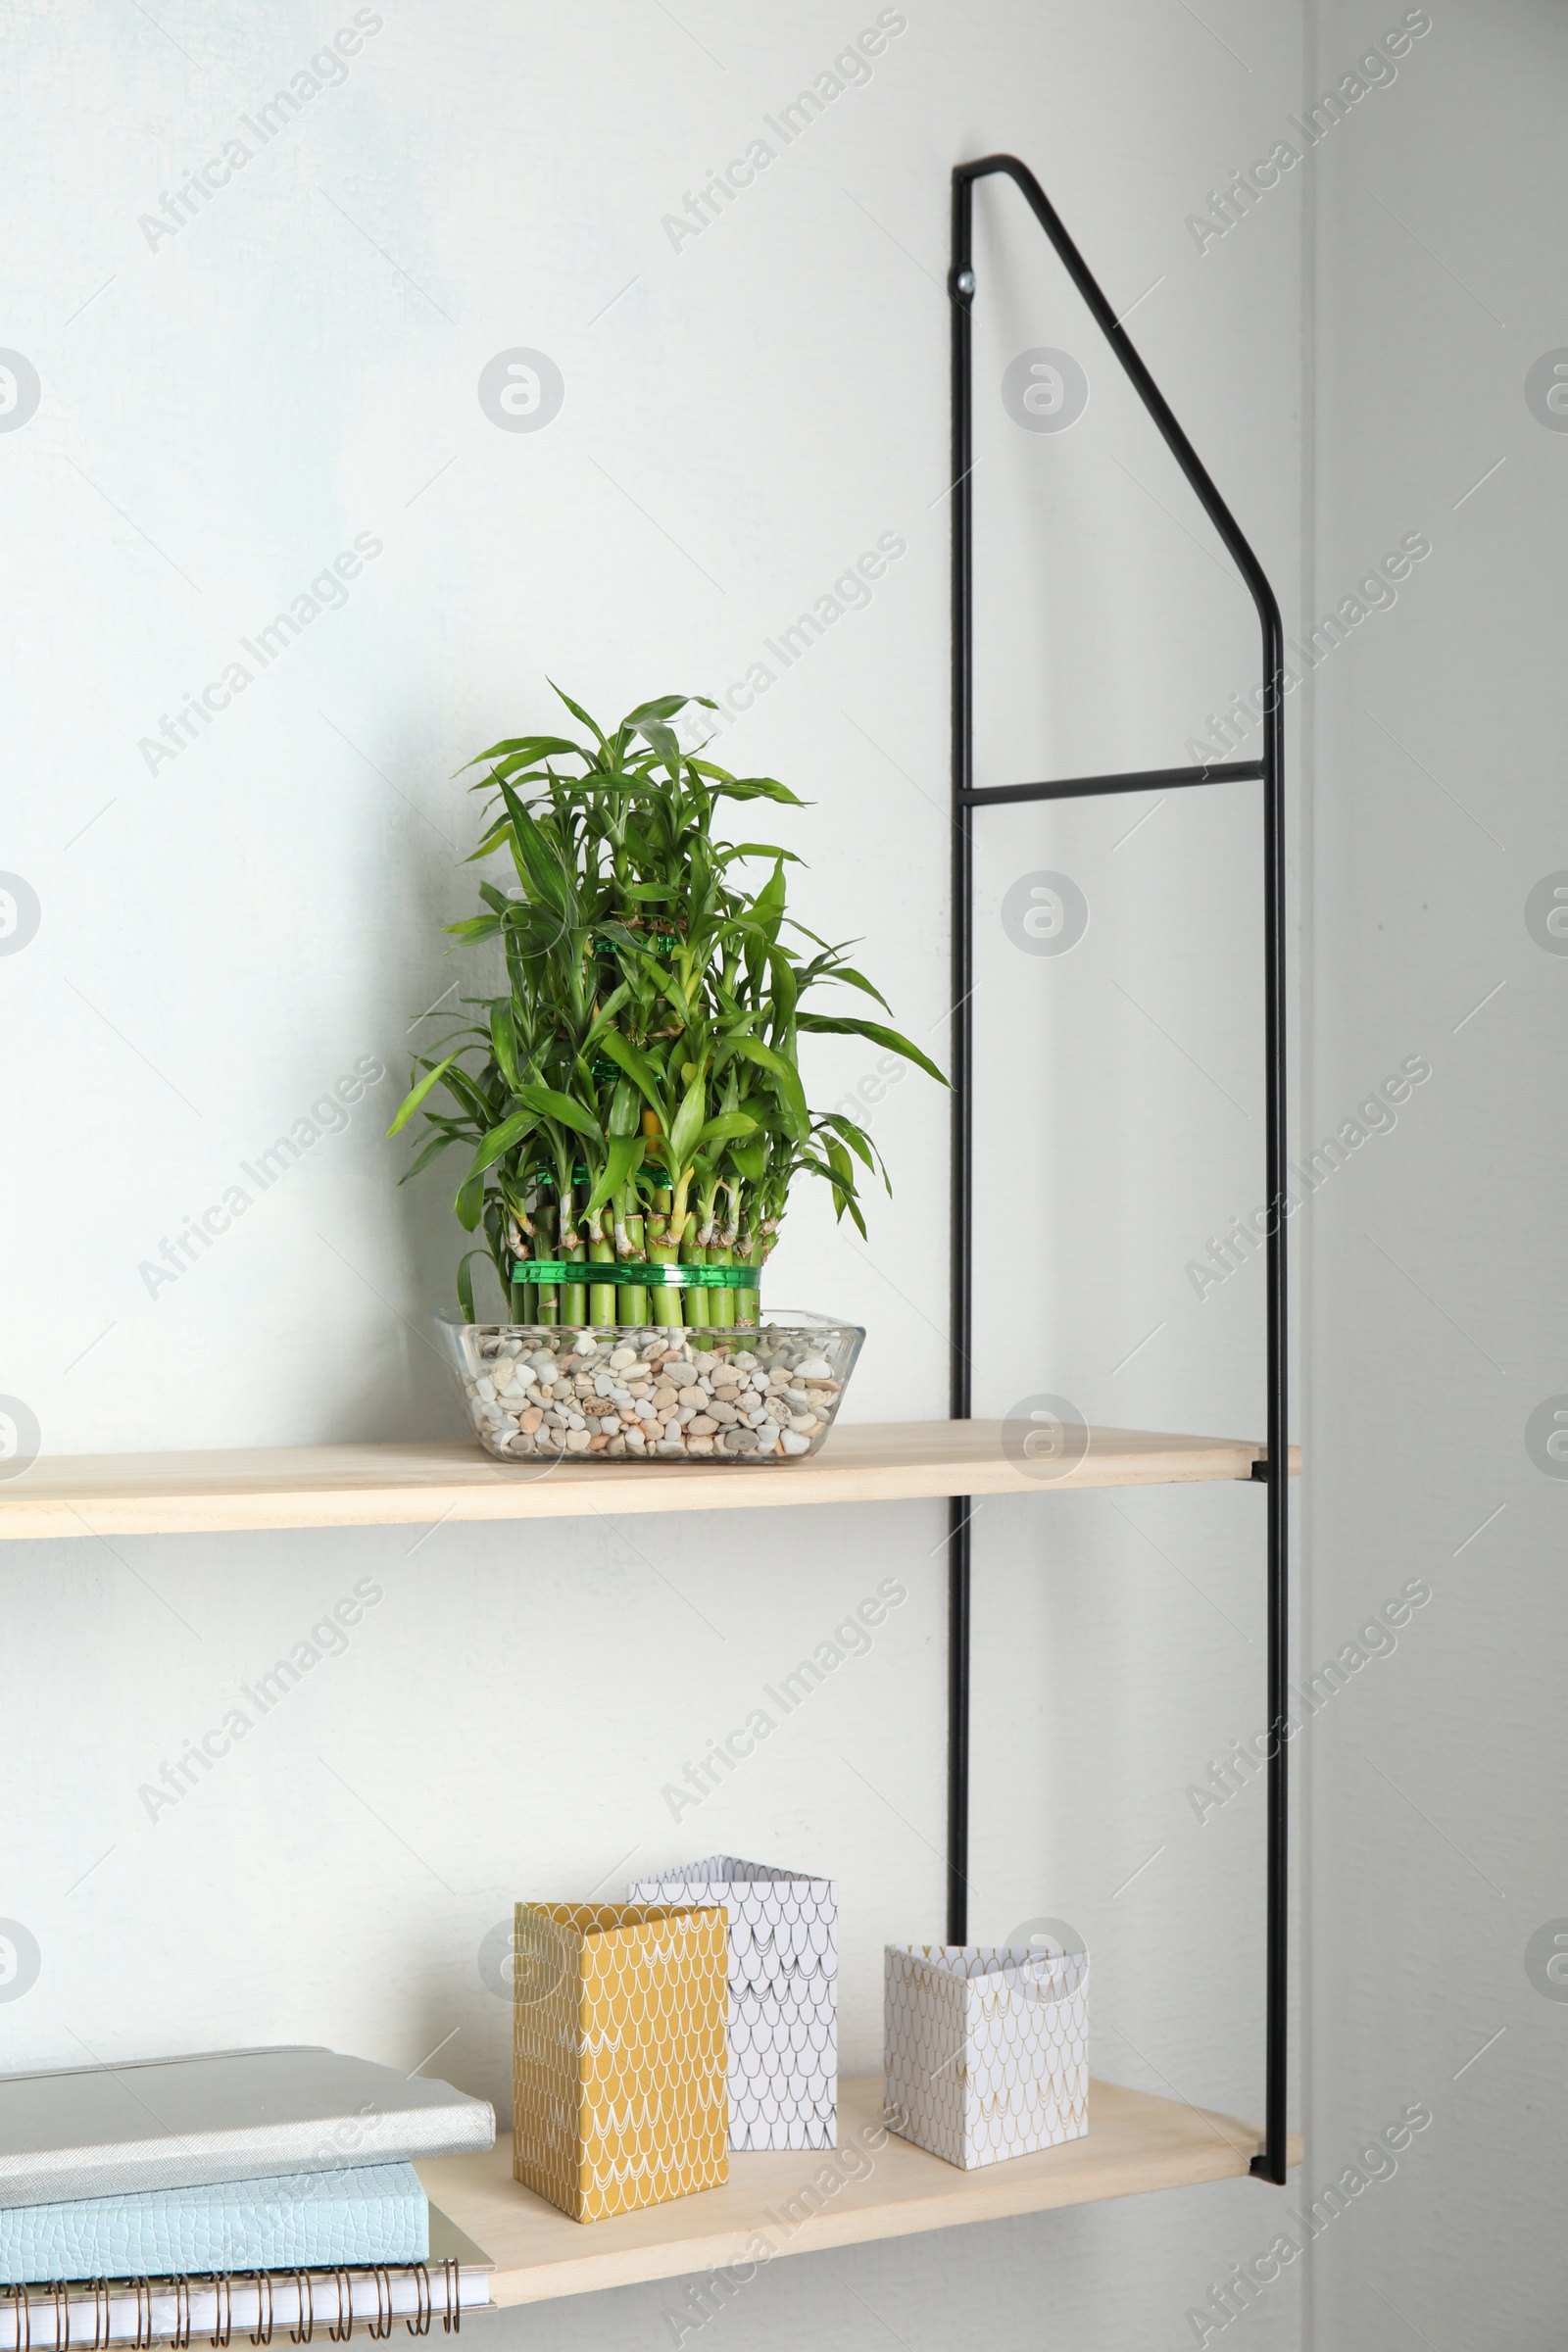 Photo of Shelves with green lucky bamboo in glass bowl and decor on light wall